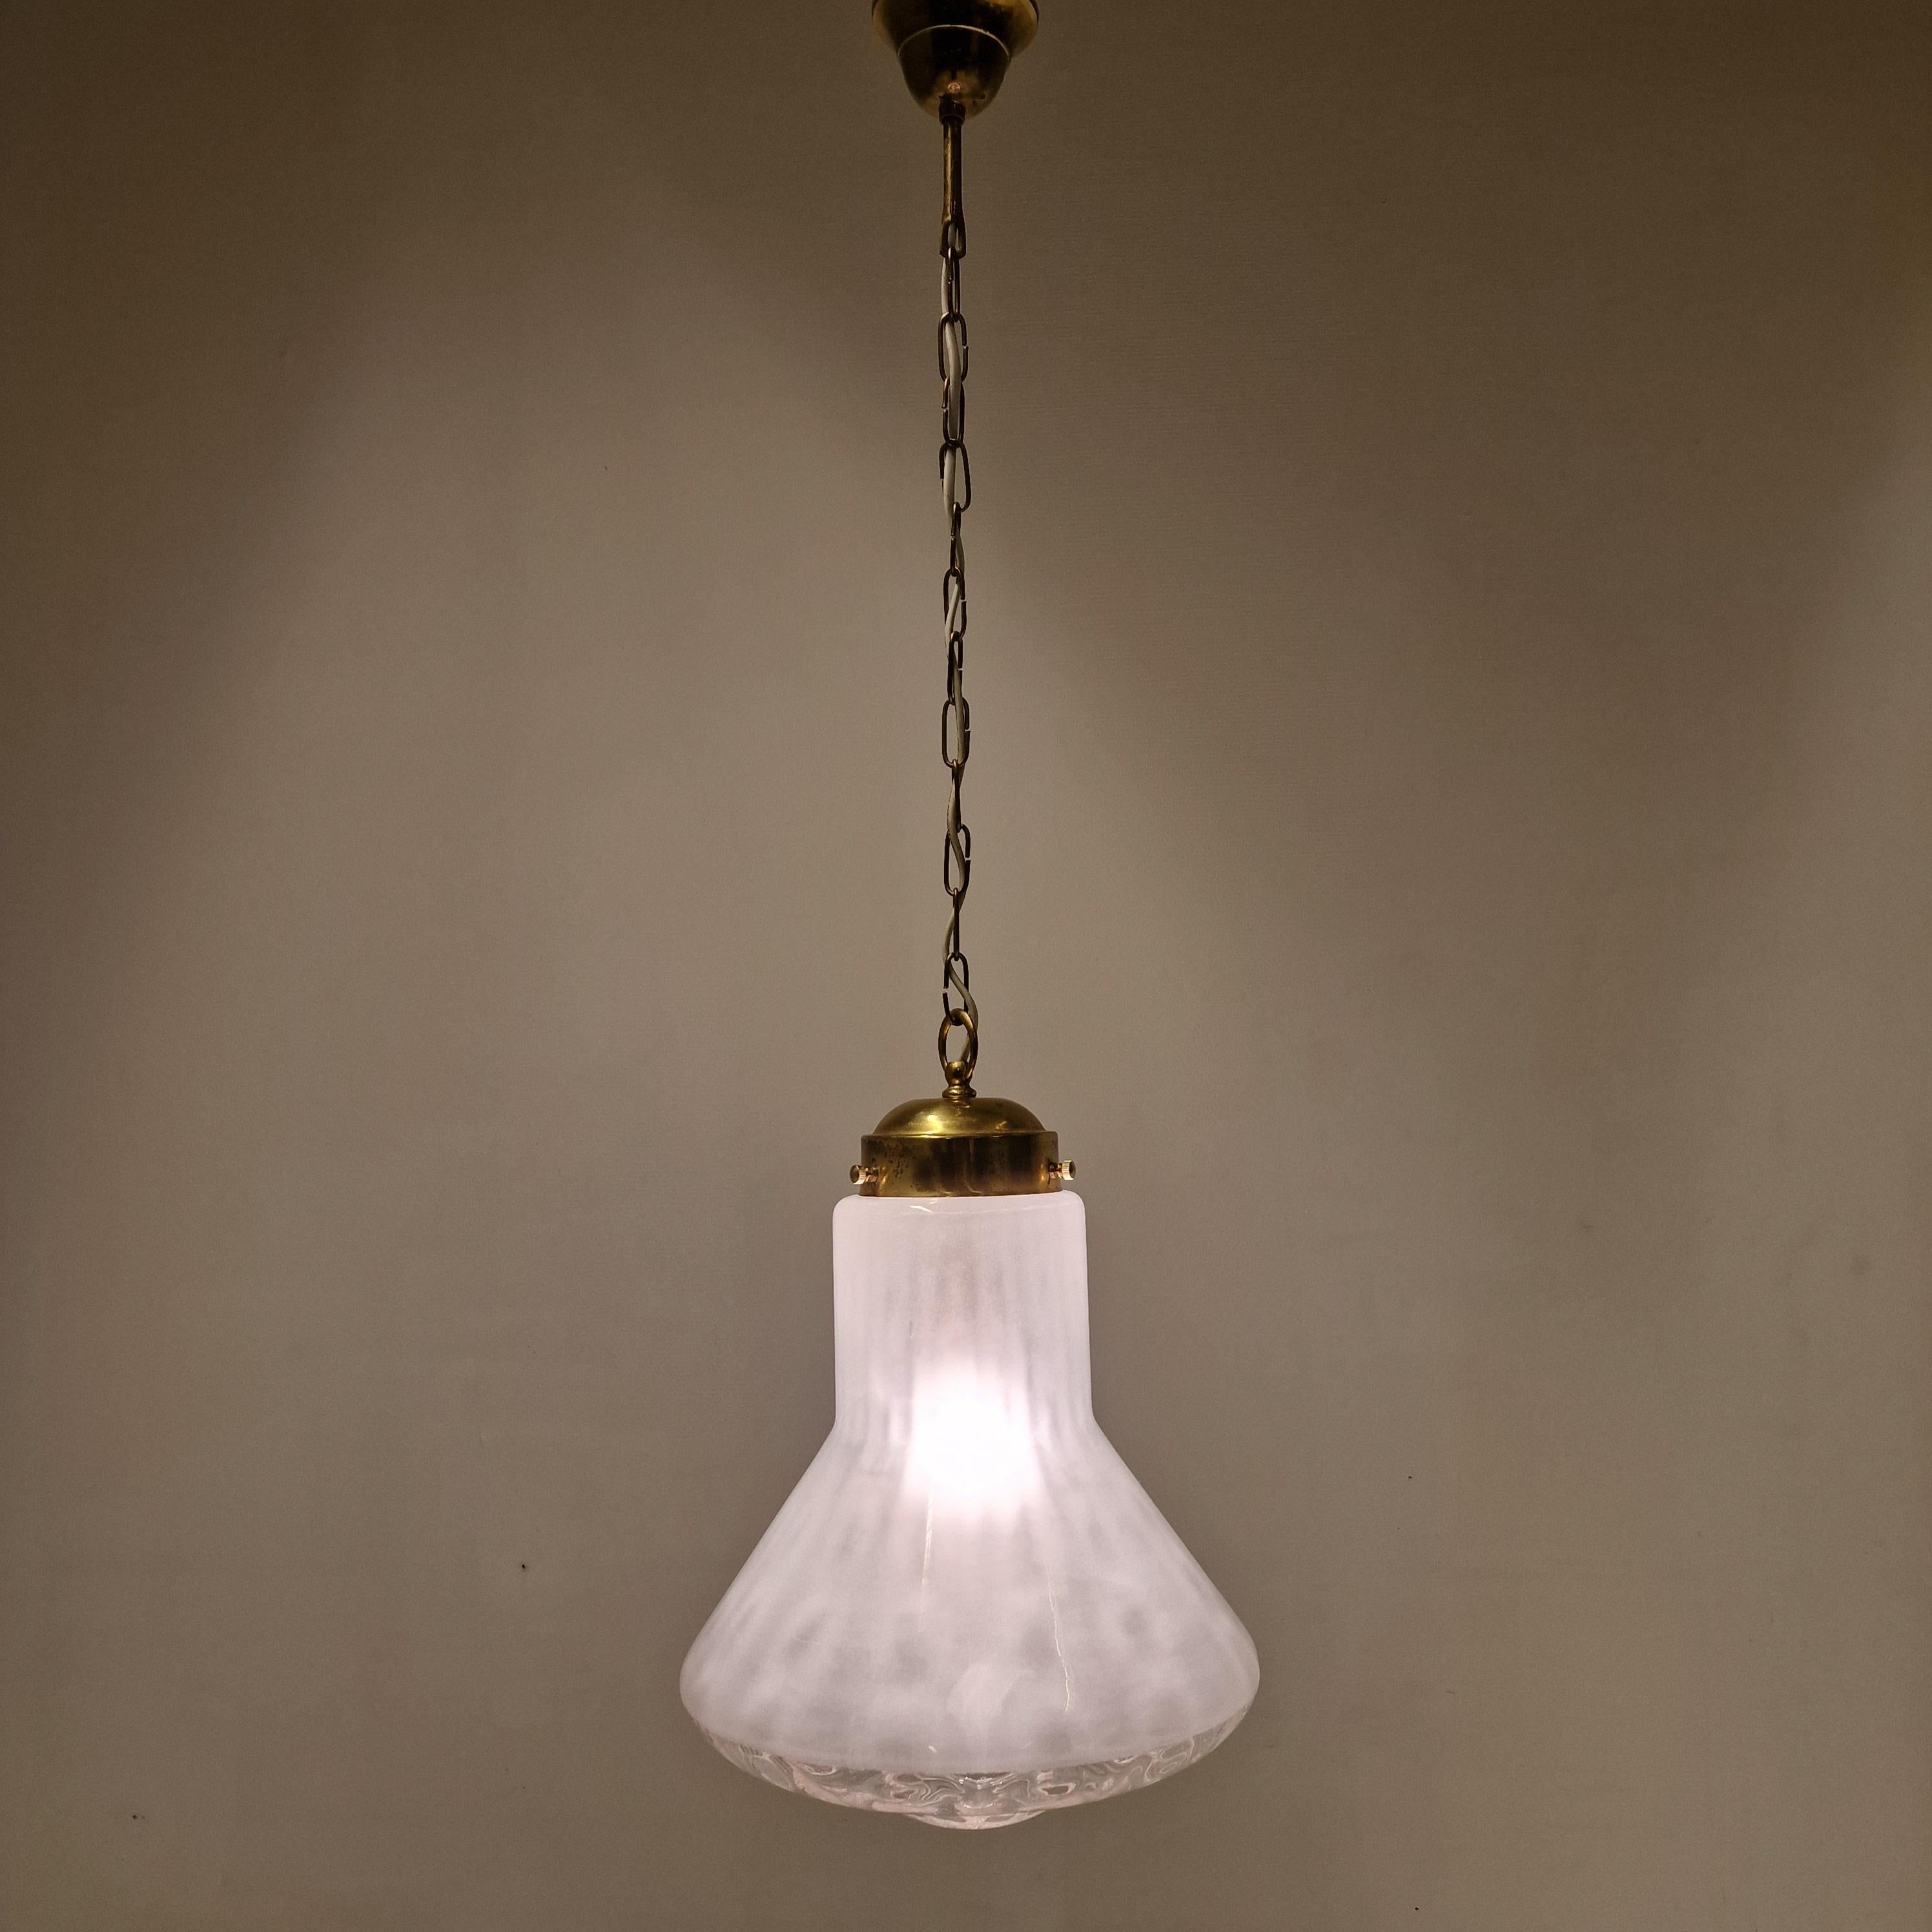 Very nice pendant fabricated in Italy in the 70's.

The lamp shows true craftsmanship. 
Beautiful hand blown glass bulb in white and transparent. 

Very good vintage condition, no cracks or chips. 
The wiring is suitable for all countries around the